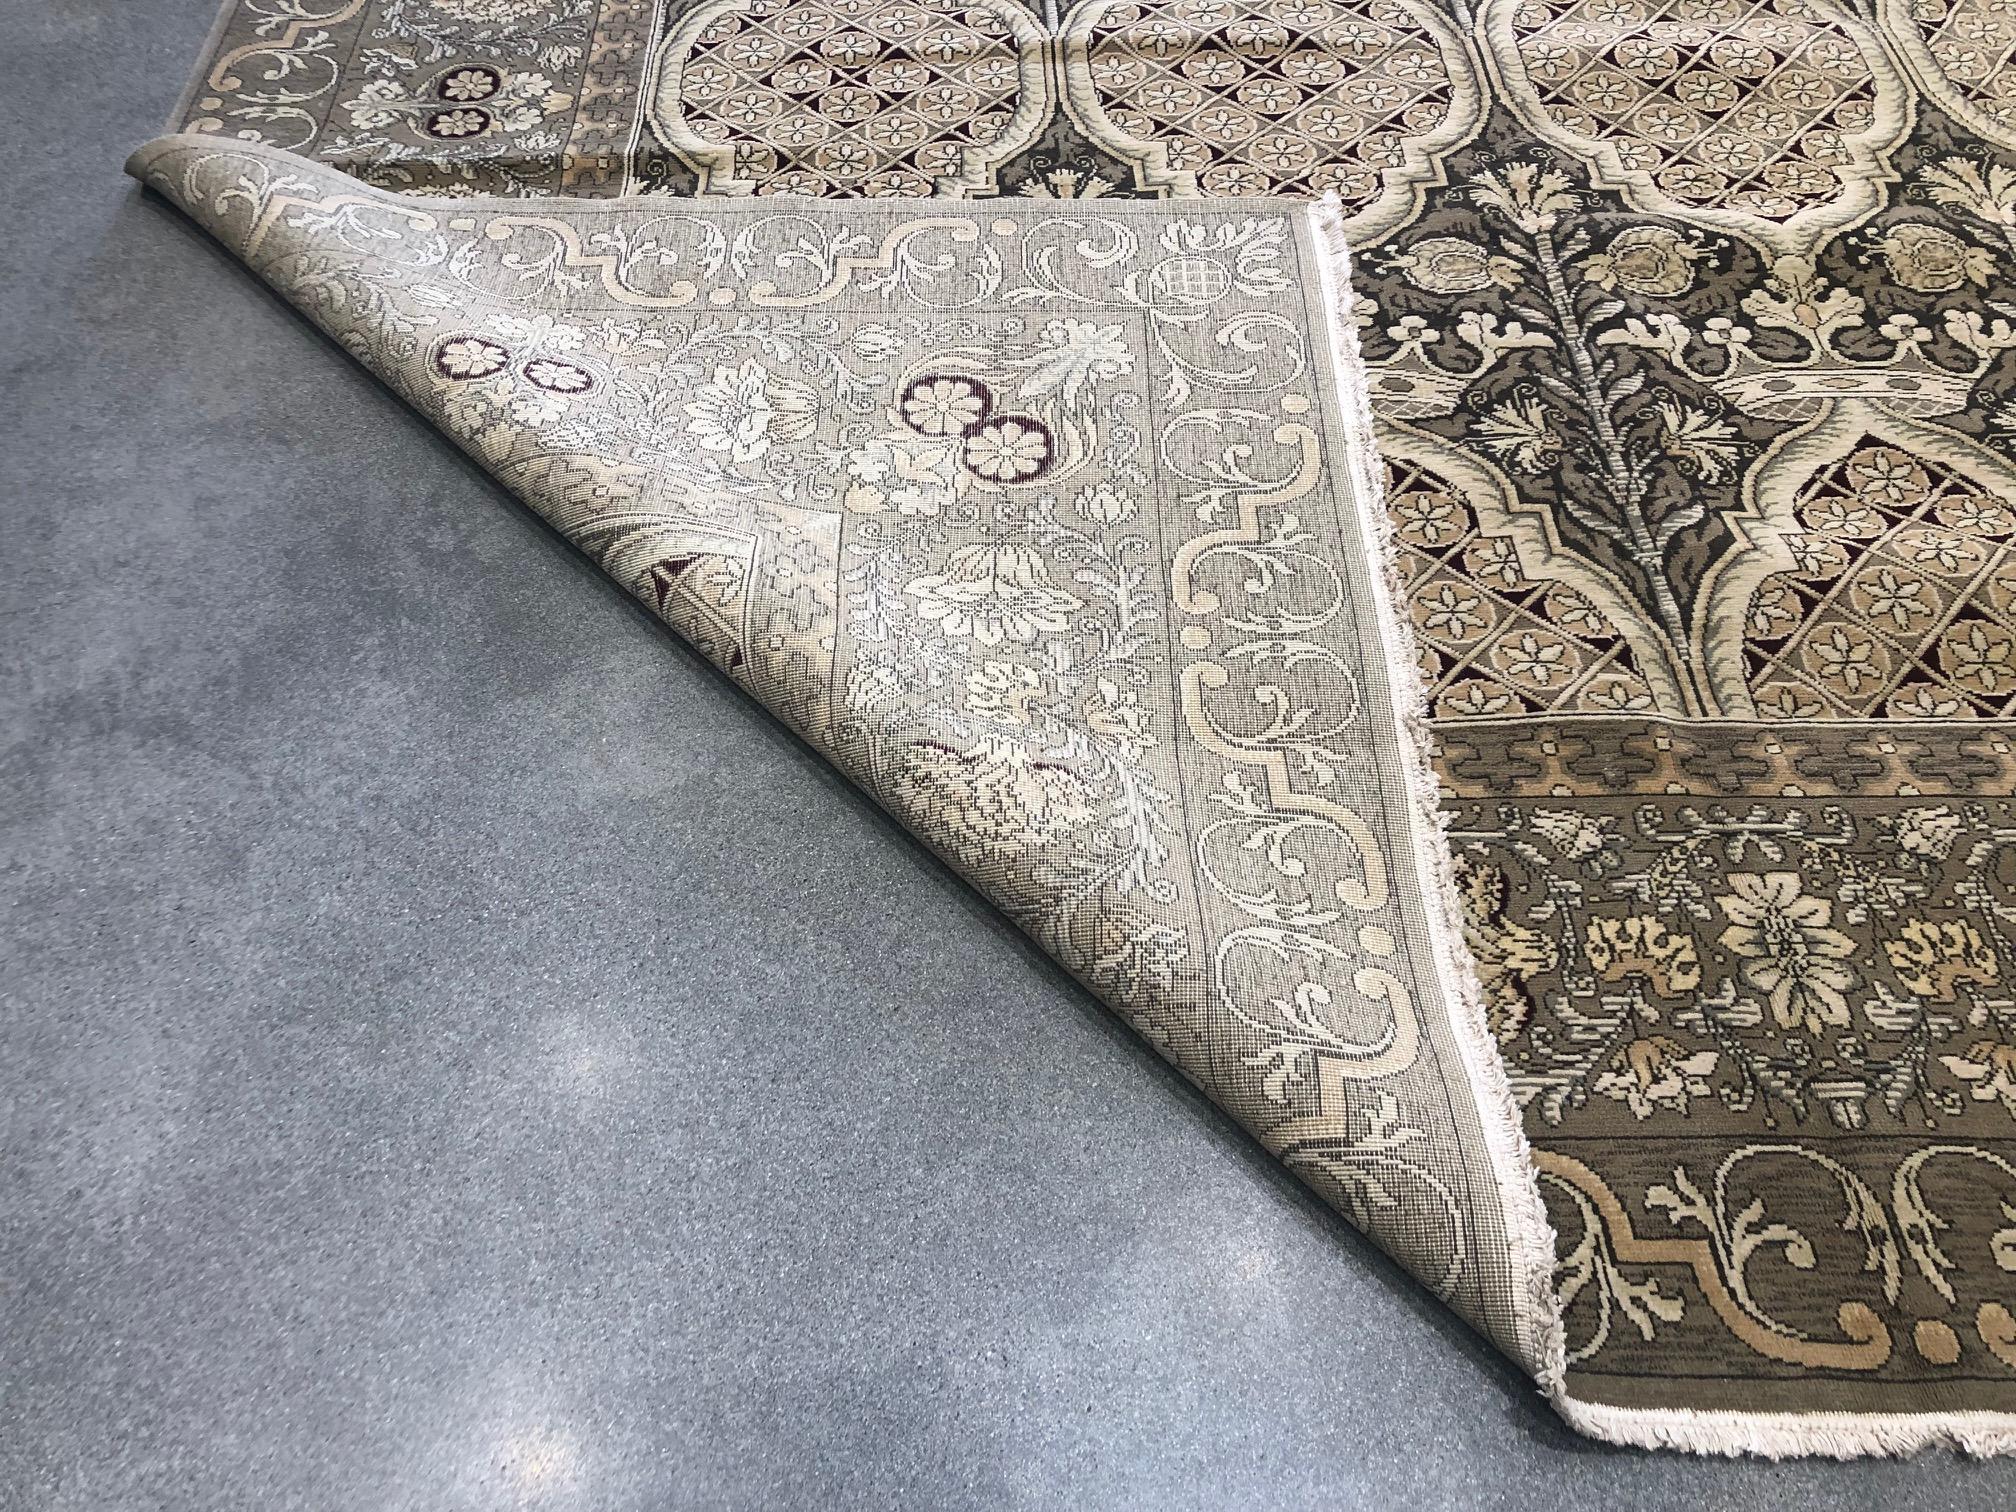 European Design Rug in Brown, Beige and Ivory In Excellent Condition For Sale In Los Angeles, CA